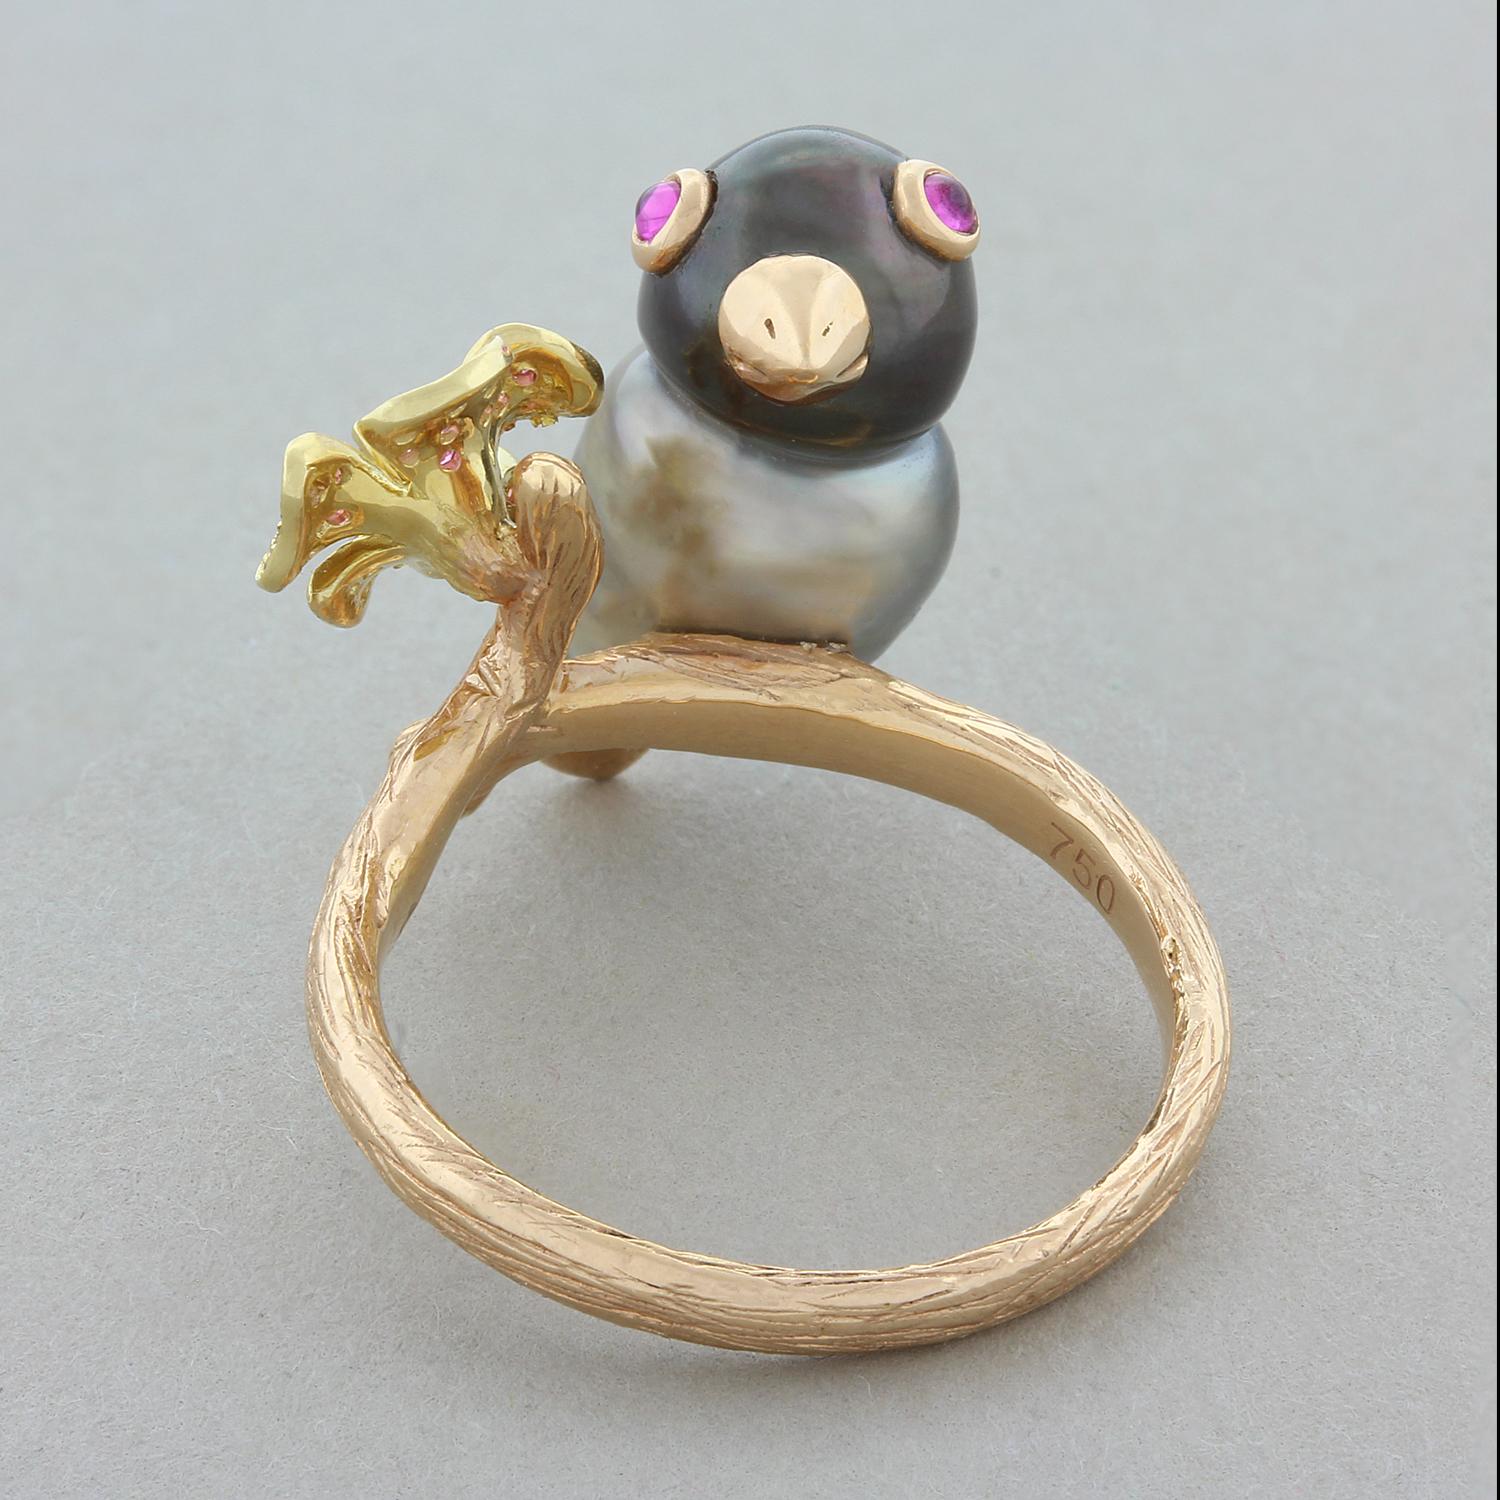 A baroque Tahitian pearl with 0.05 carats of rubies makes this birdie sitting on a branch of 18K rose gold. The branch also holds a pretty flower with 0.11 carats of pink sapphires and a 0.04 carat diamond in the center. A unique and cute